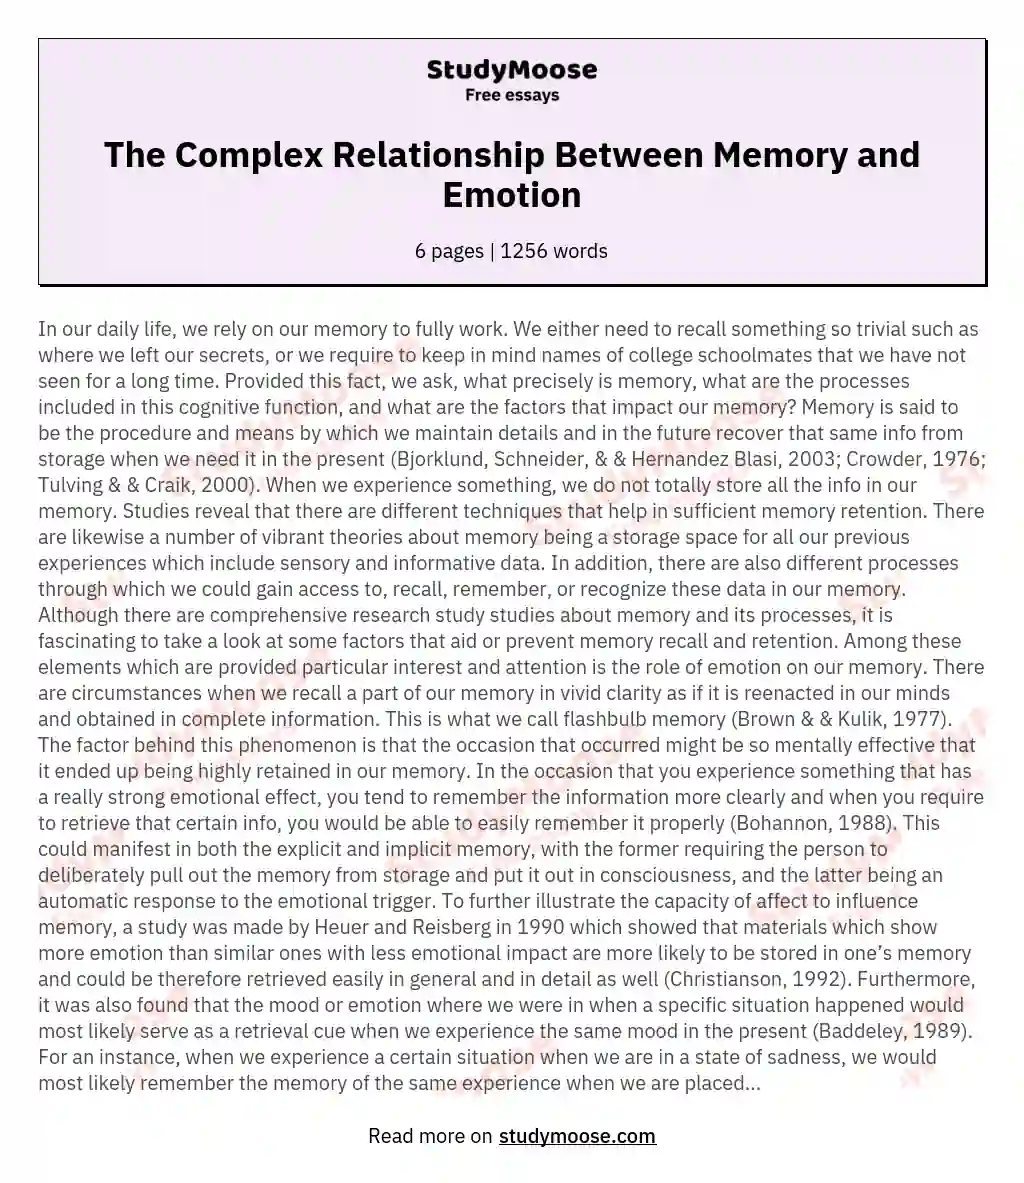 The Complex Relationship Between Memory and Emotion essay